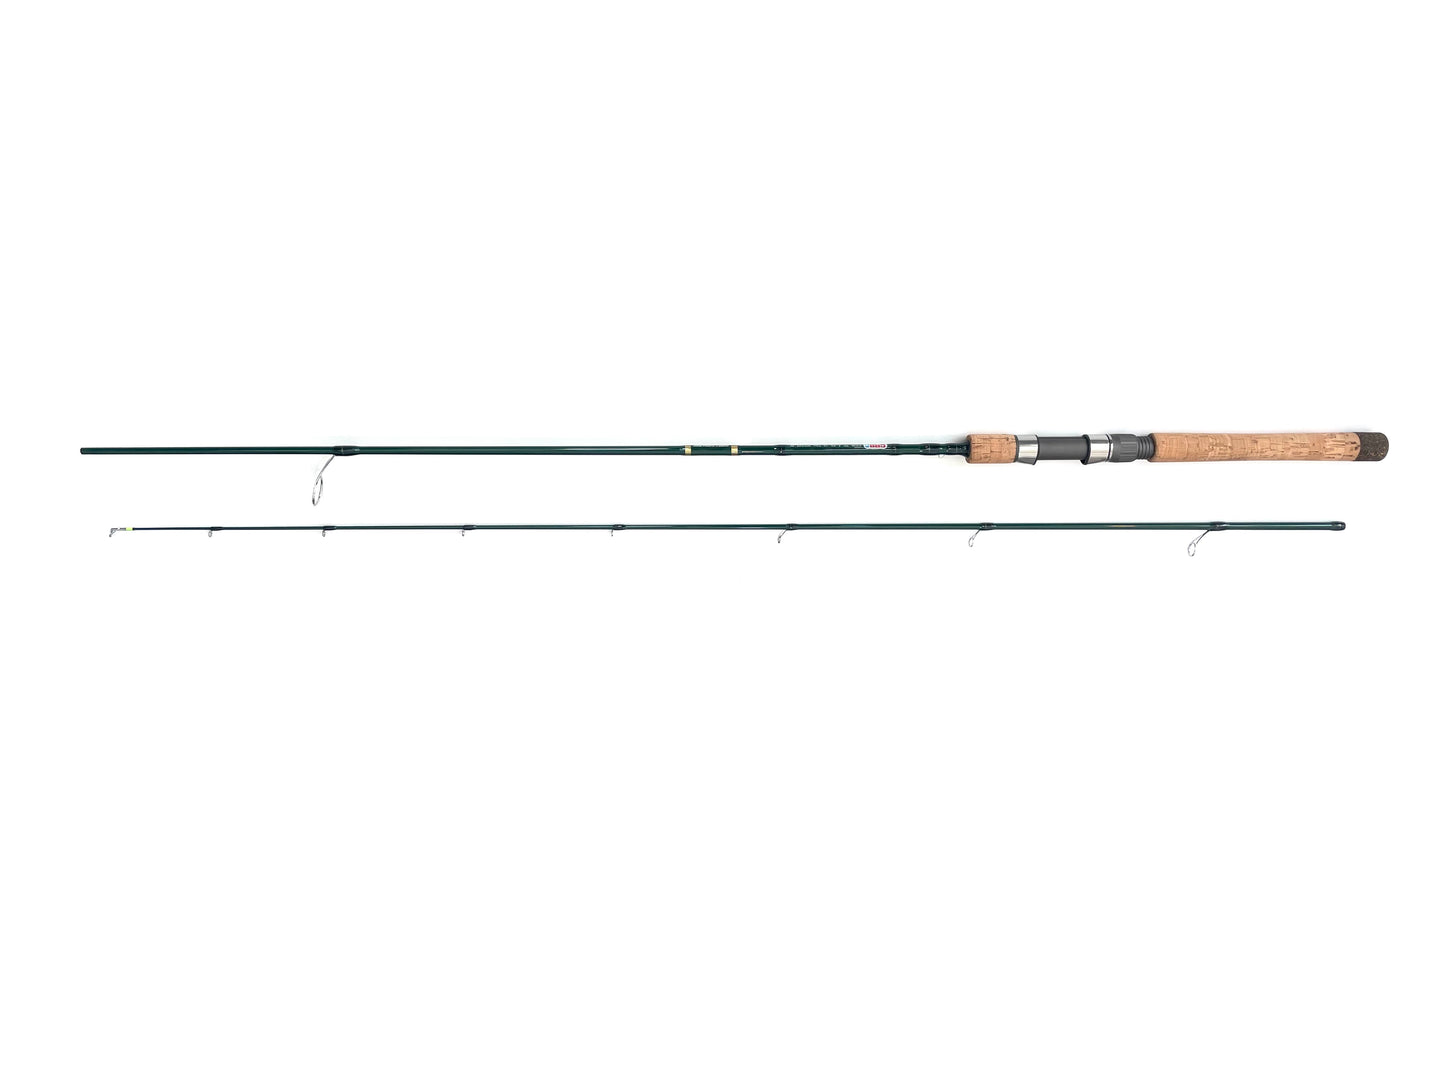 Elite Series Forest Green 7'0" 8-15lb MOD/FAST 2 Piece Fishing Rod